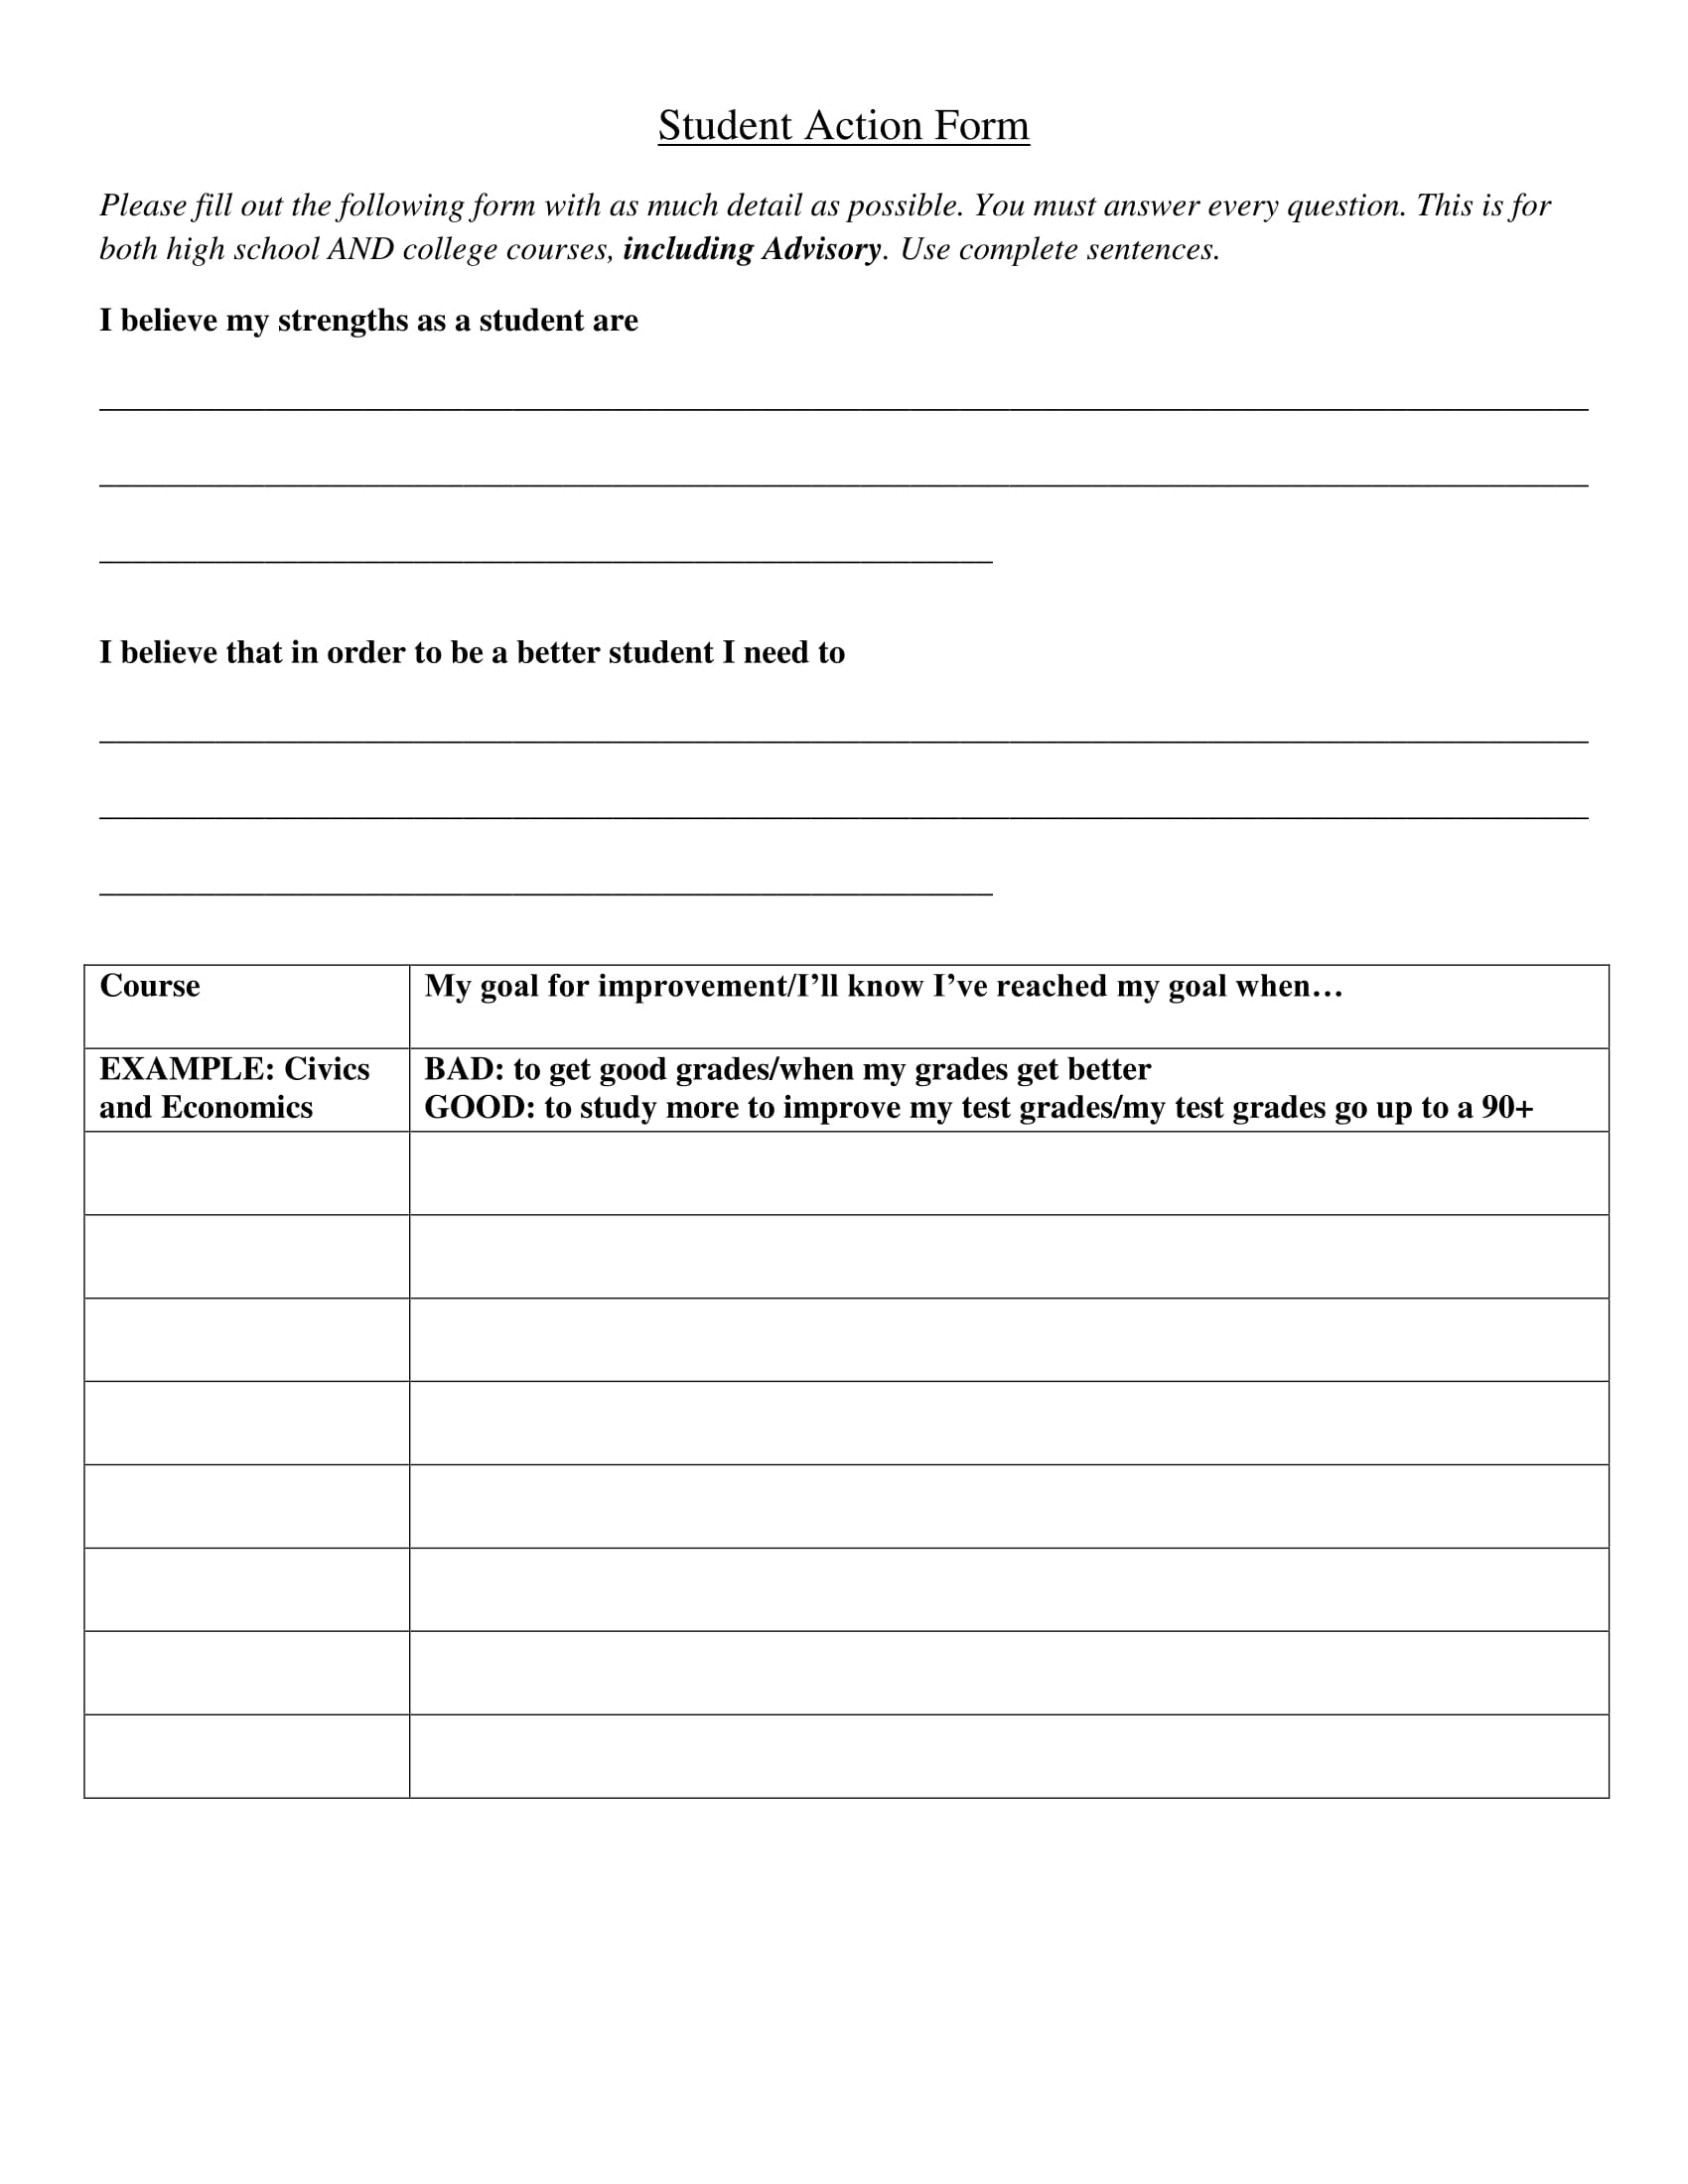 student action form 1